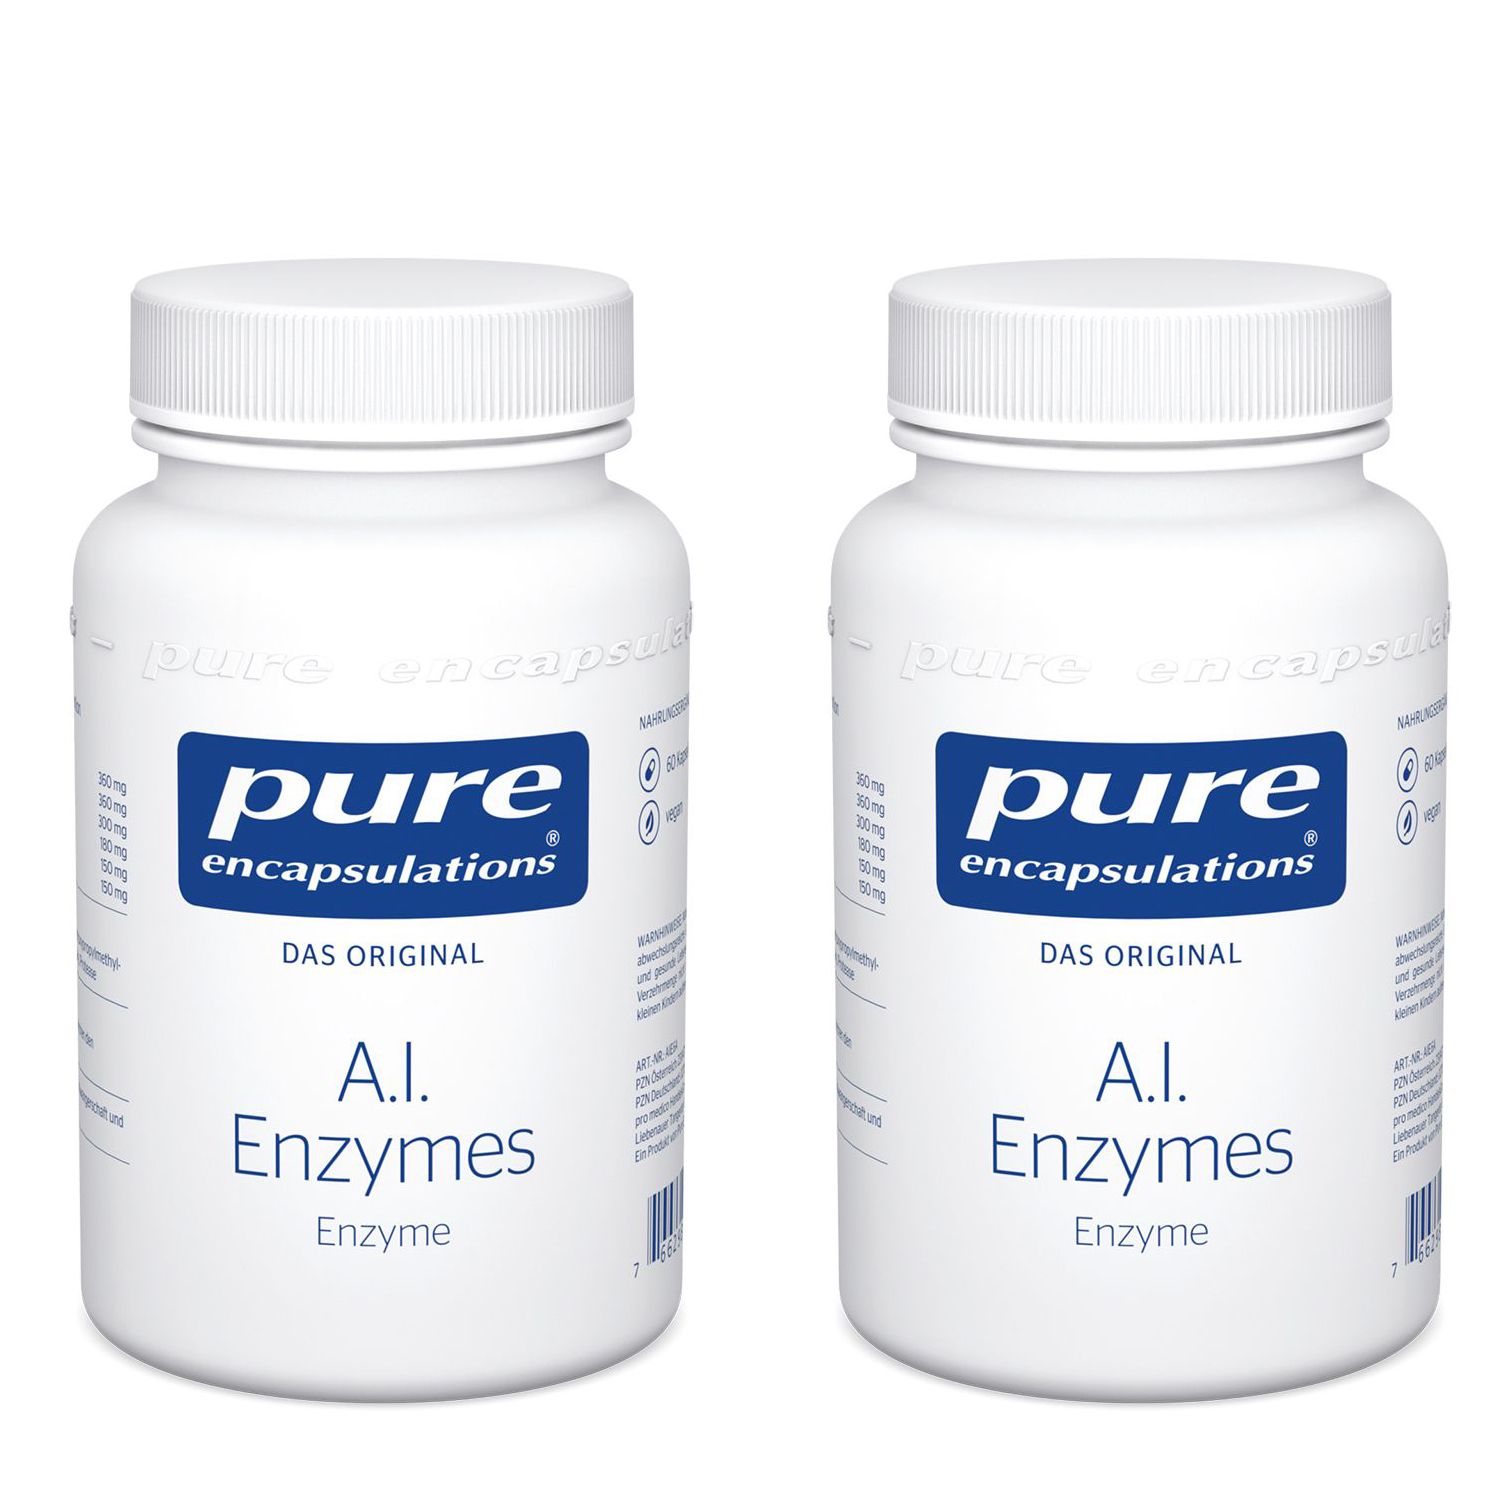 pure encapsulations® A.I. Enzymes